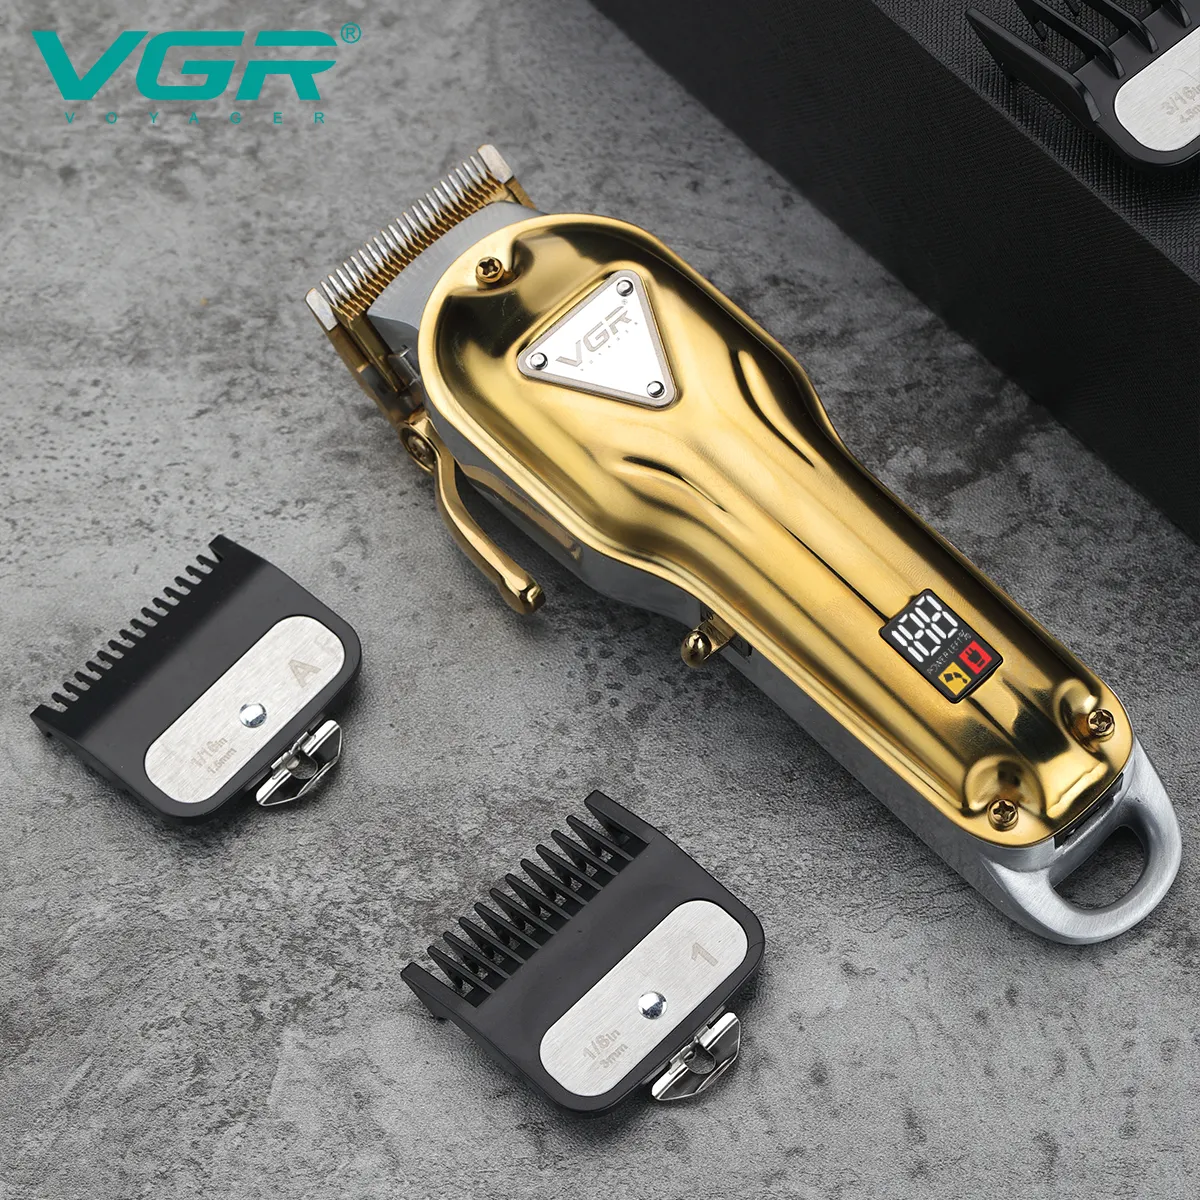 VGR V-134 metal cordless hair trimmer hair cutting machine professional rechargeable electric barber hair clipper for men